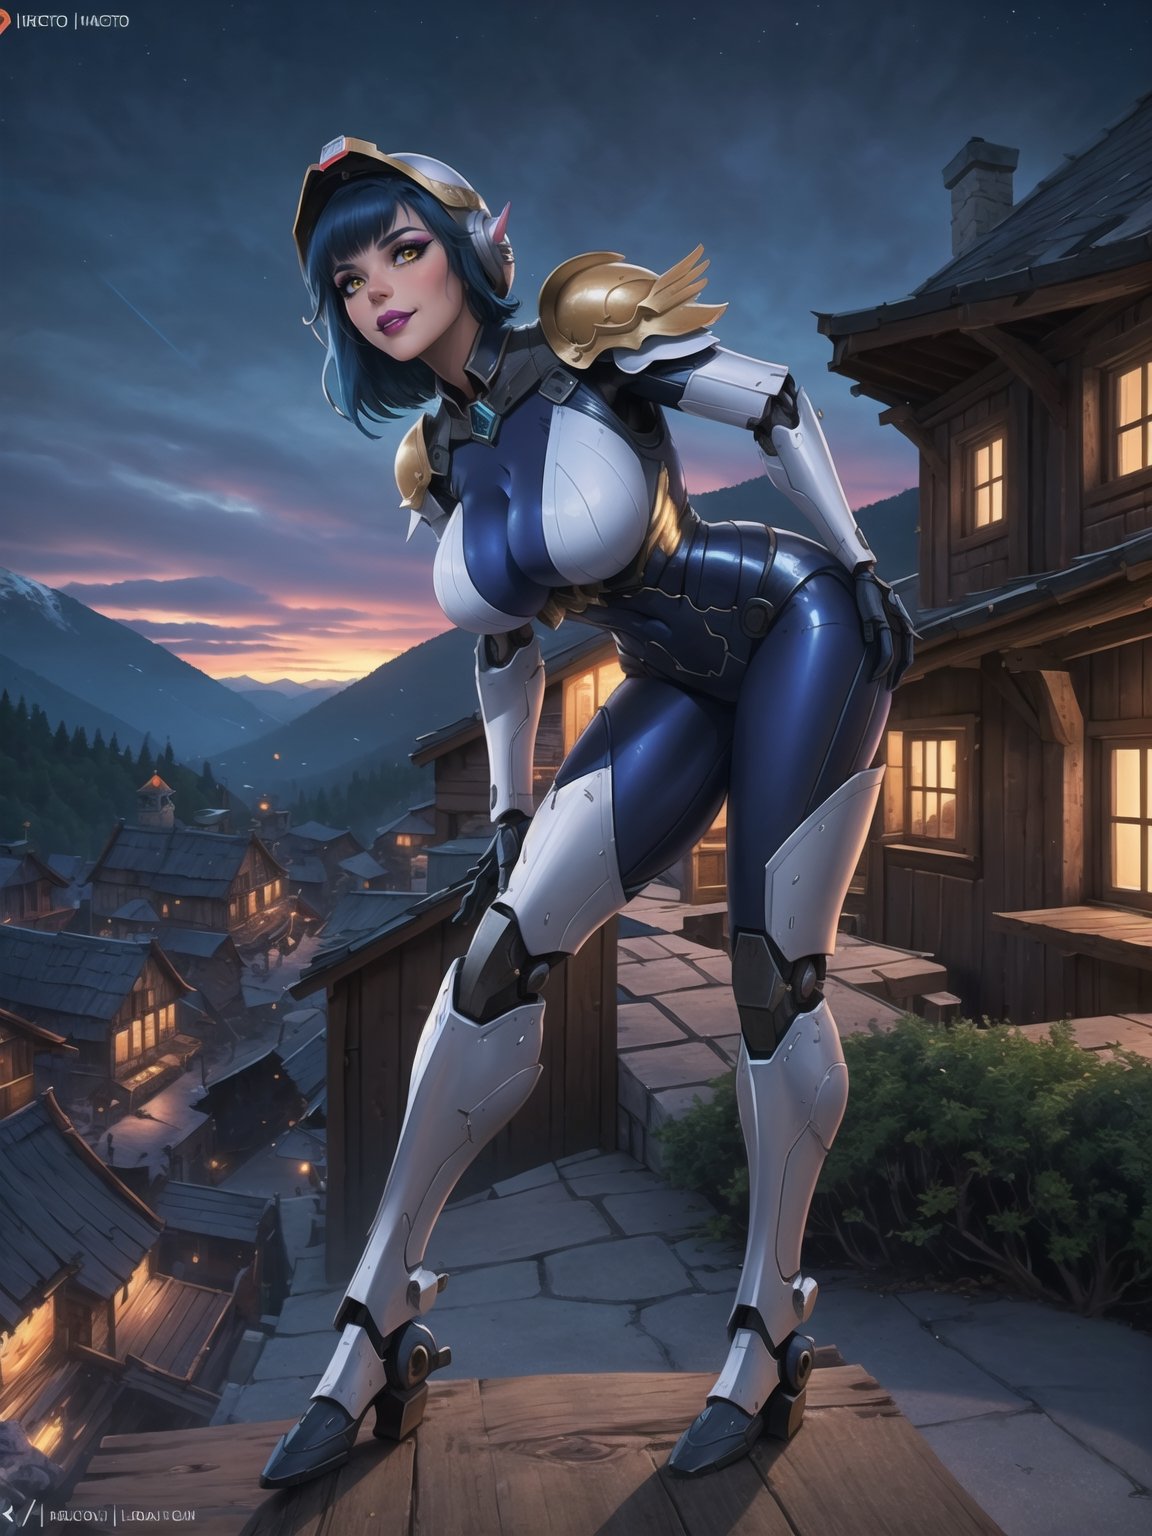 ((An eagle woman_solo)), has gigantic breasts, is wearing mecha+robotic armor with blue parts, totally white outfit, she has ((wearing a helmet)), short hair, blue hair, hair with bangs in front of her eyes, she is in a village on top of the mountains at night, with many stone structures, trees, houses made of wood, large wooden structures, warcraft, 16K, UHD, best possible quality, ultra detailed, best possible resolution, ultra technological, futuristic, robotic, Unreal Engine 5, professional photography, she is ((sensual pose with interaction and leaning on anything + object + on something + leaning against)) + Perfect anatomy, ((full body)), More detail, better_hands